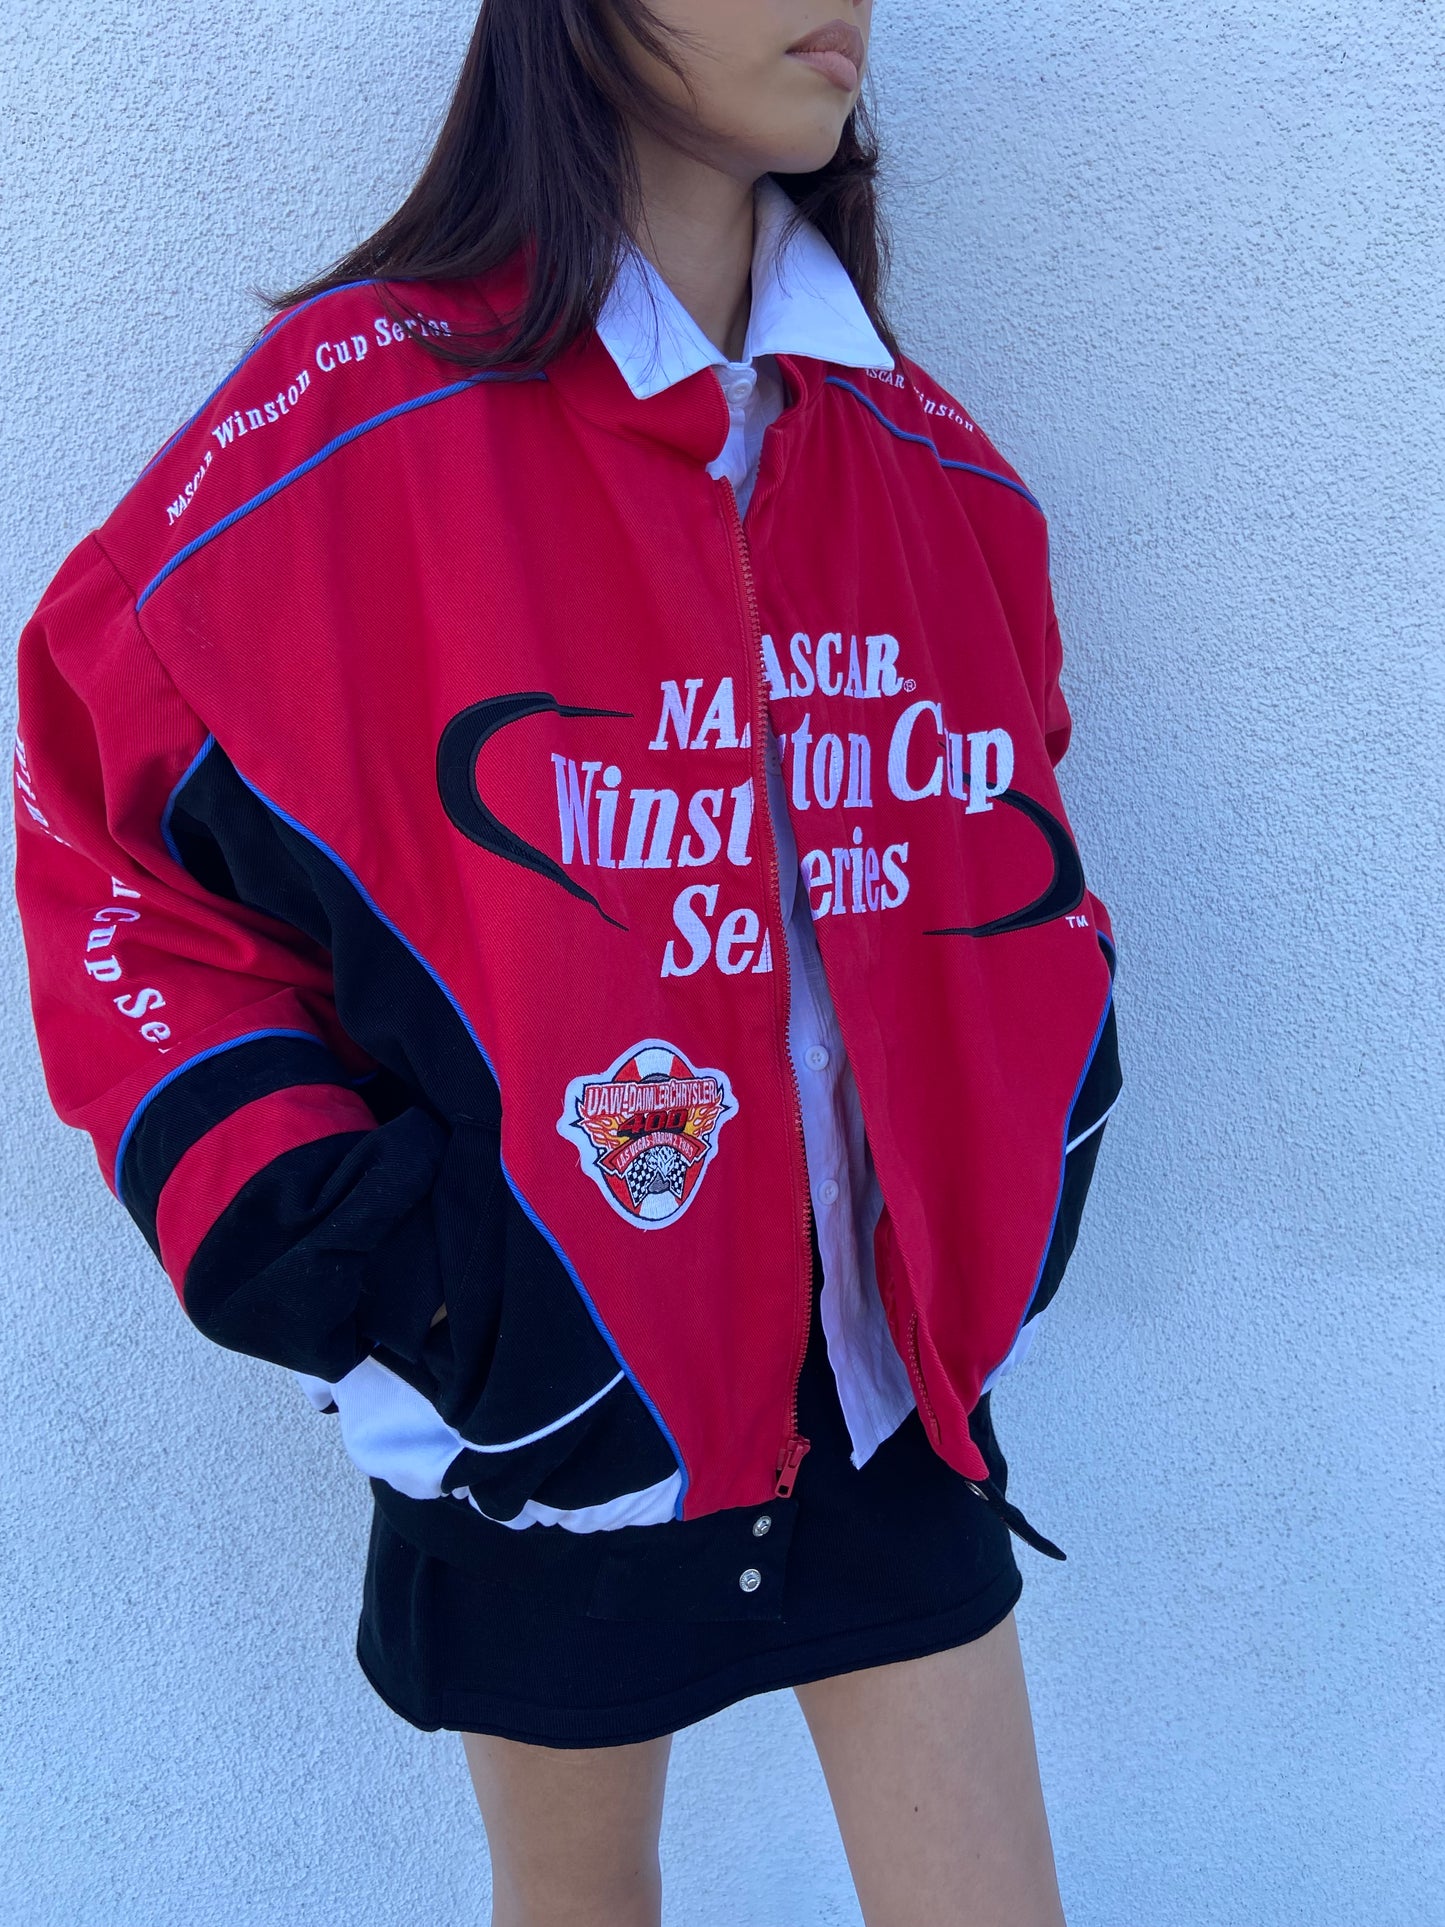 Red Winston Cup Series NASCAR Jacket - M